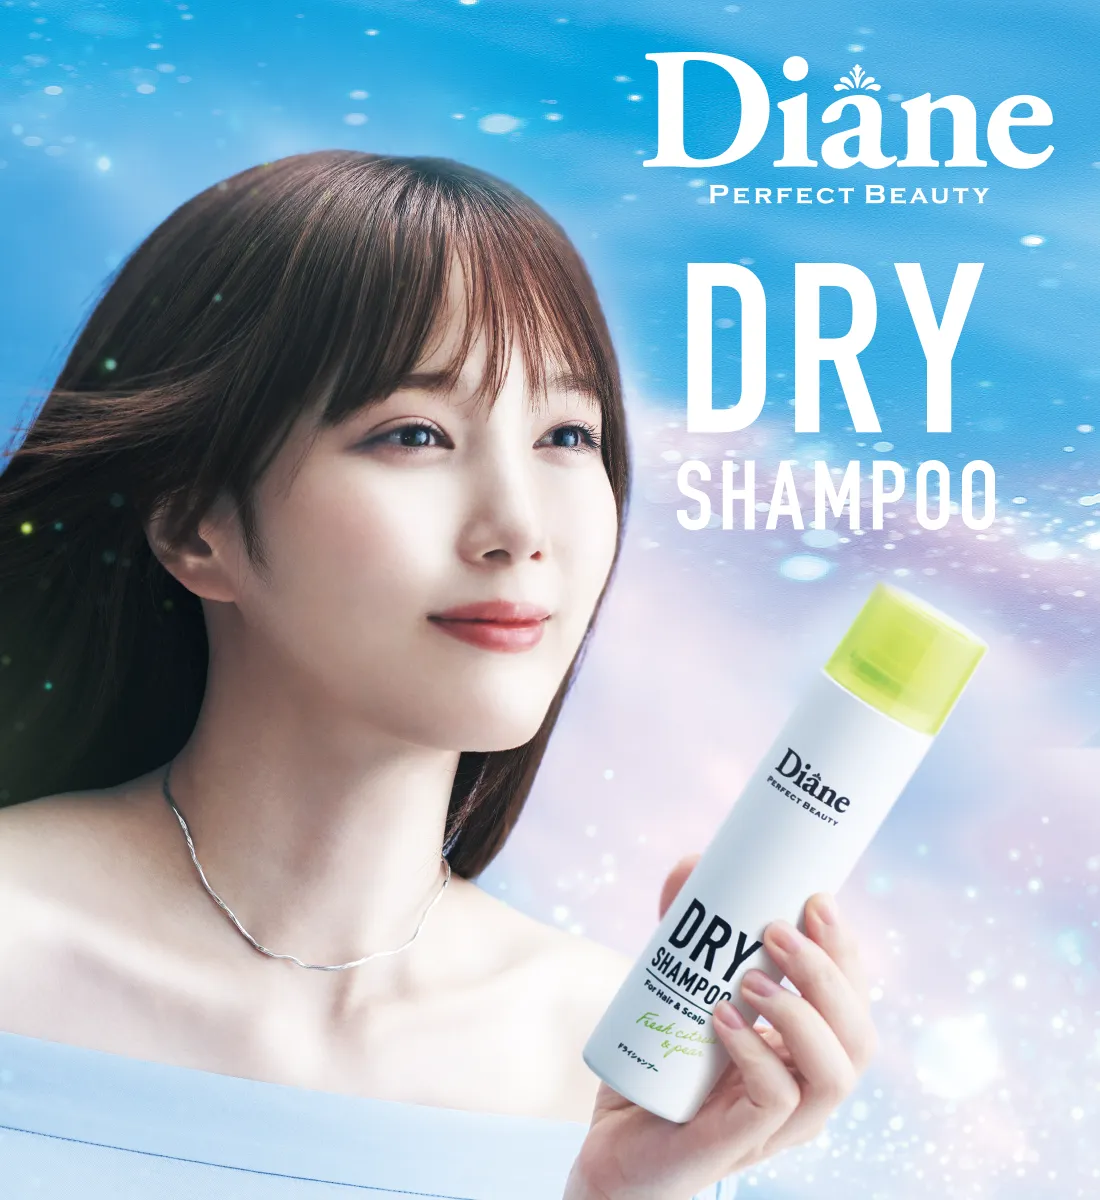 Perfect Beautry - Dry Shampoo